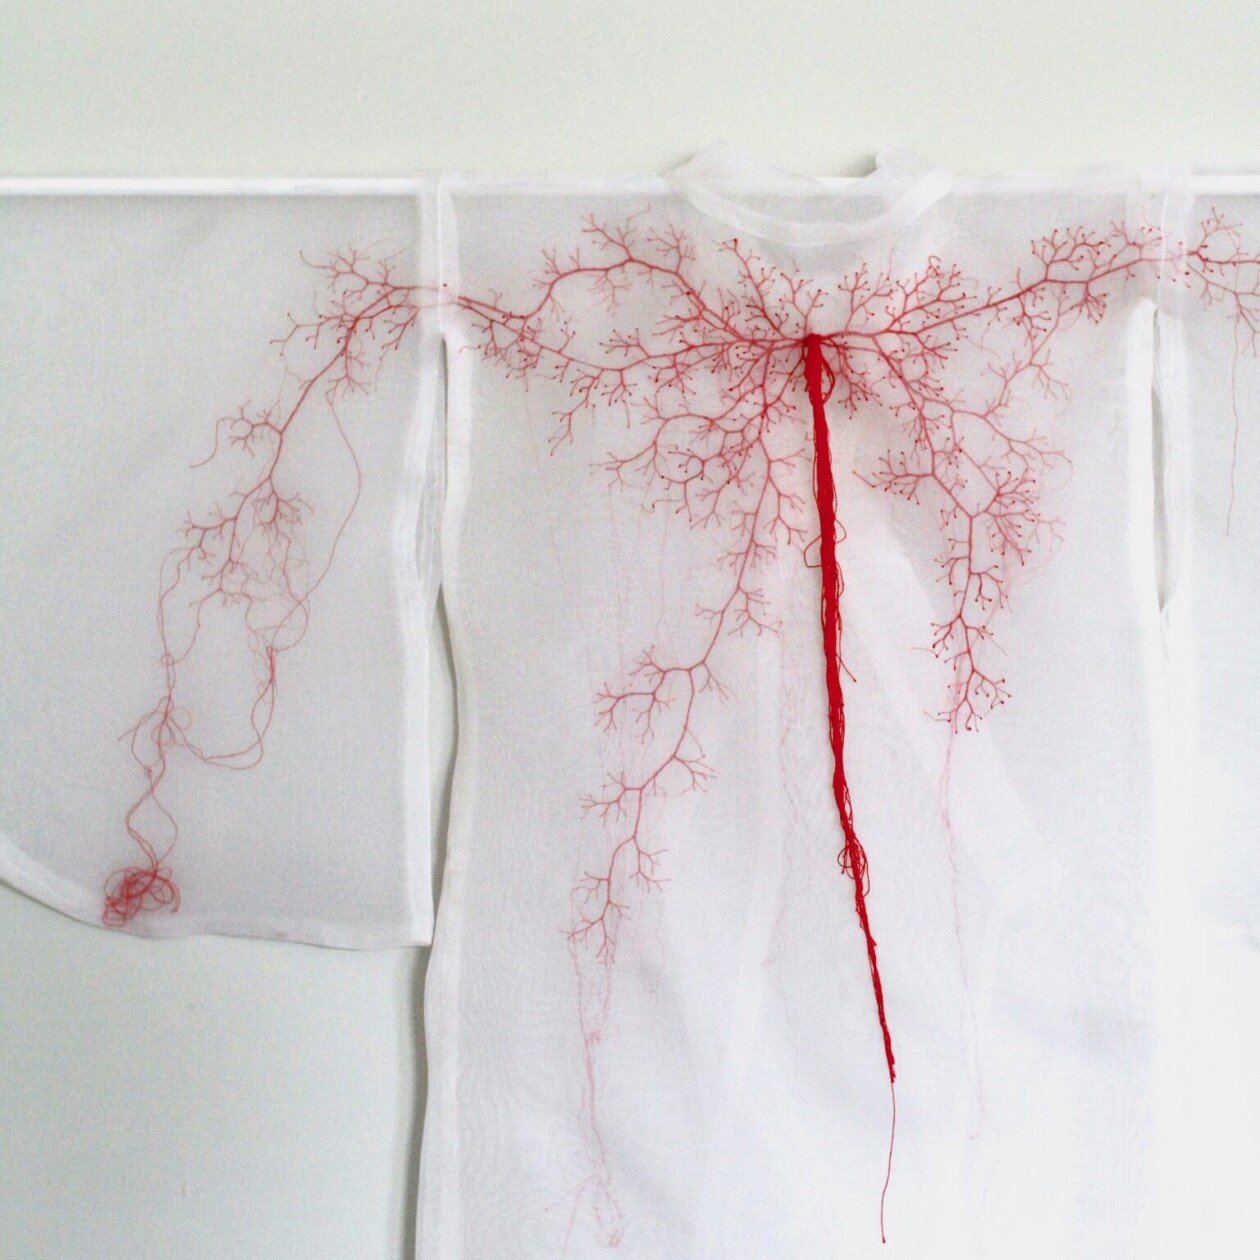 Red Threads, Intriguing Mixed Media Sculptures By Rima Day (14)